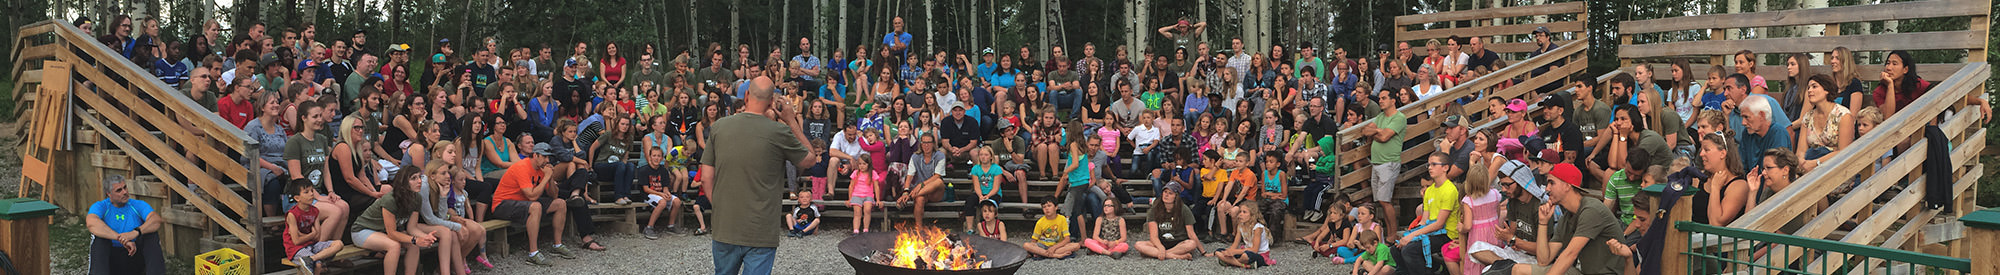 Summer Family Camp